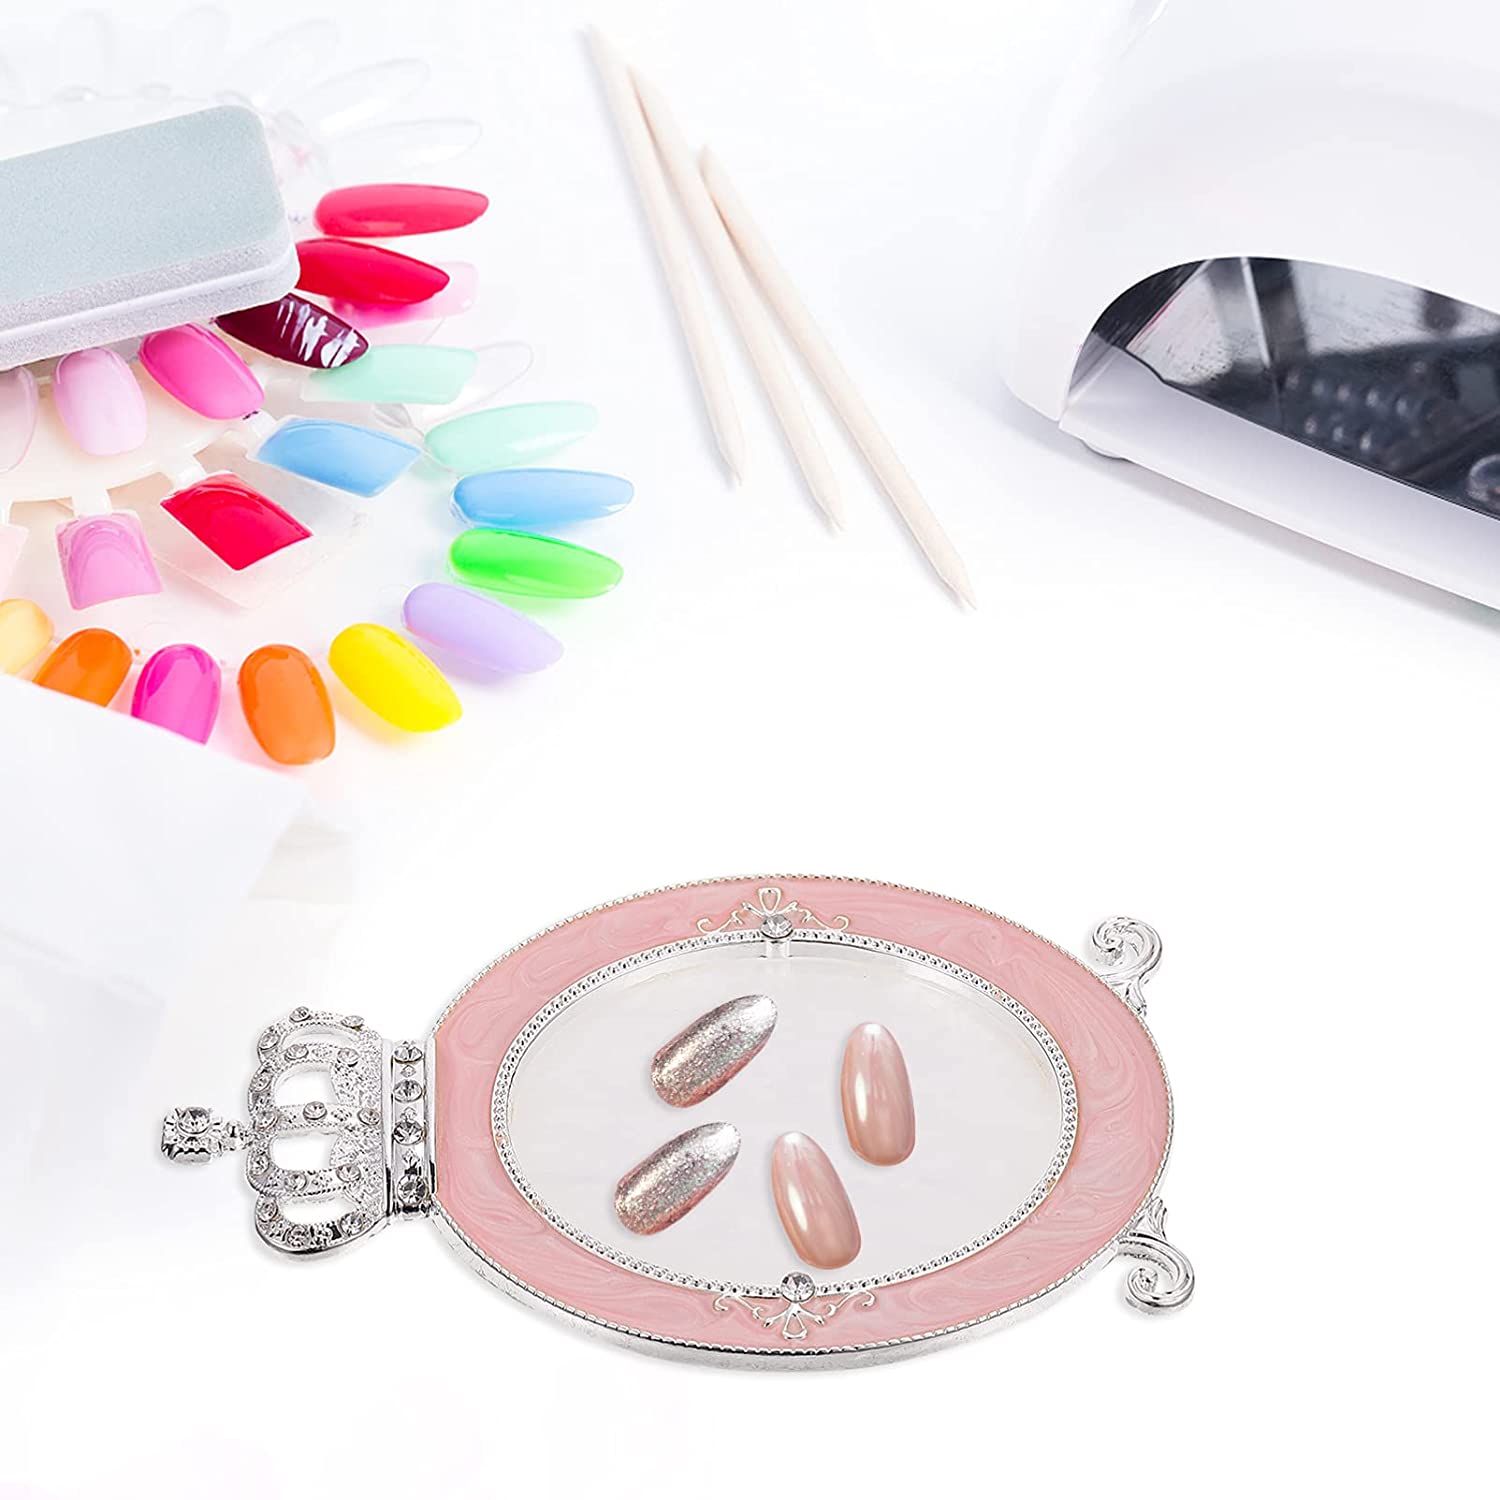 Marble Nail Painting Palette Golden Edged Round Dishes Color Mixing UV Gel Polish  Paint Tool Nail Art Design Nail Tips Display From Goocare, $3.71 |  DHgate.Com